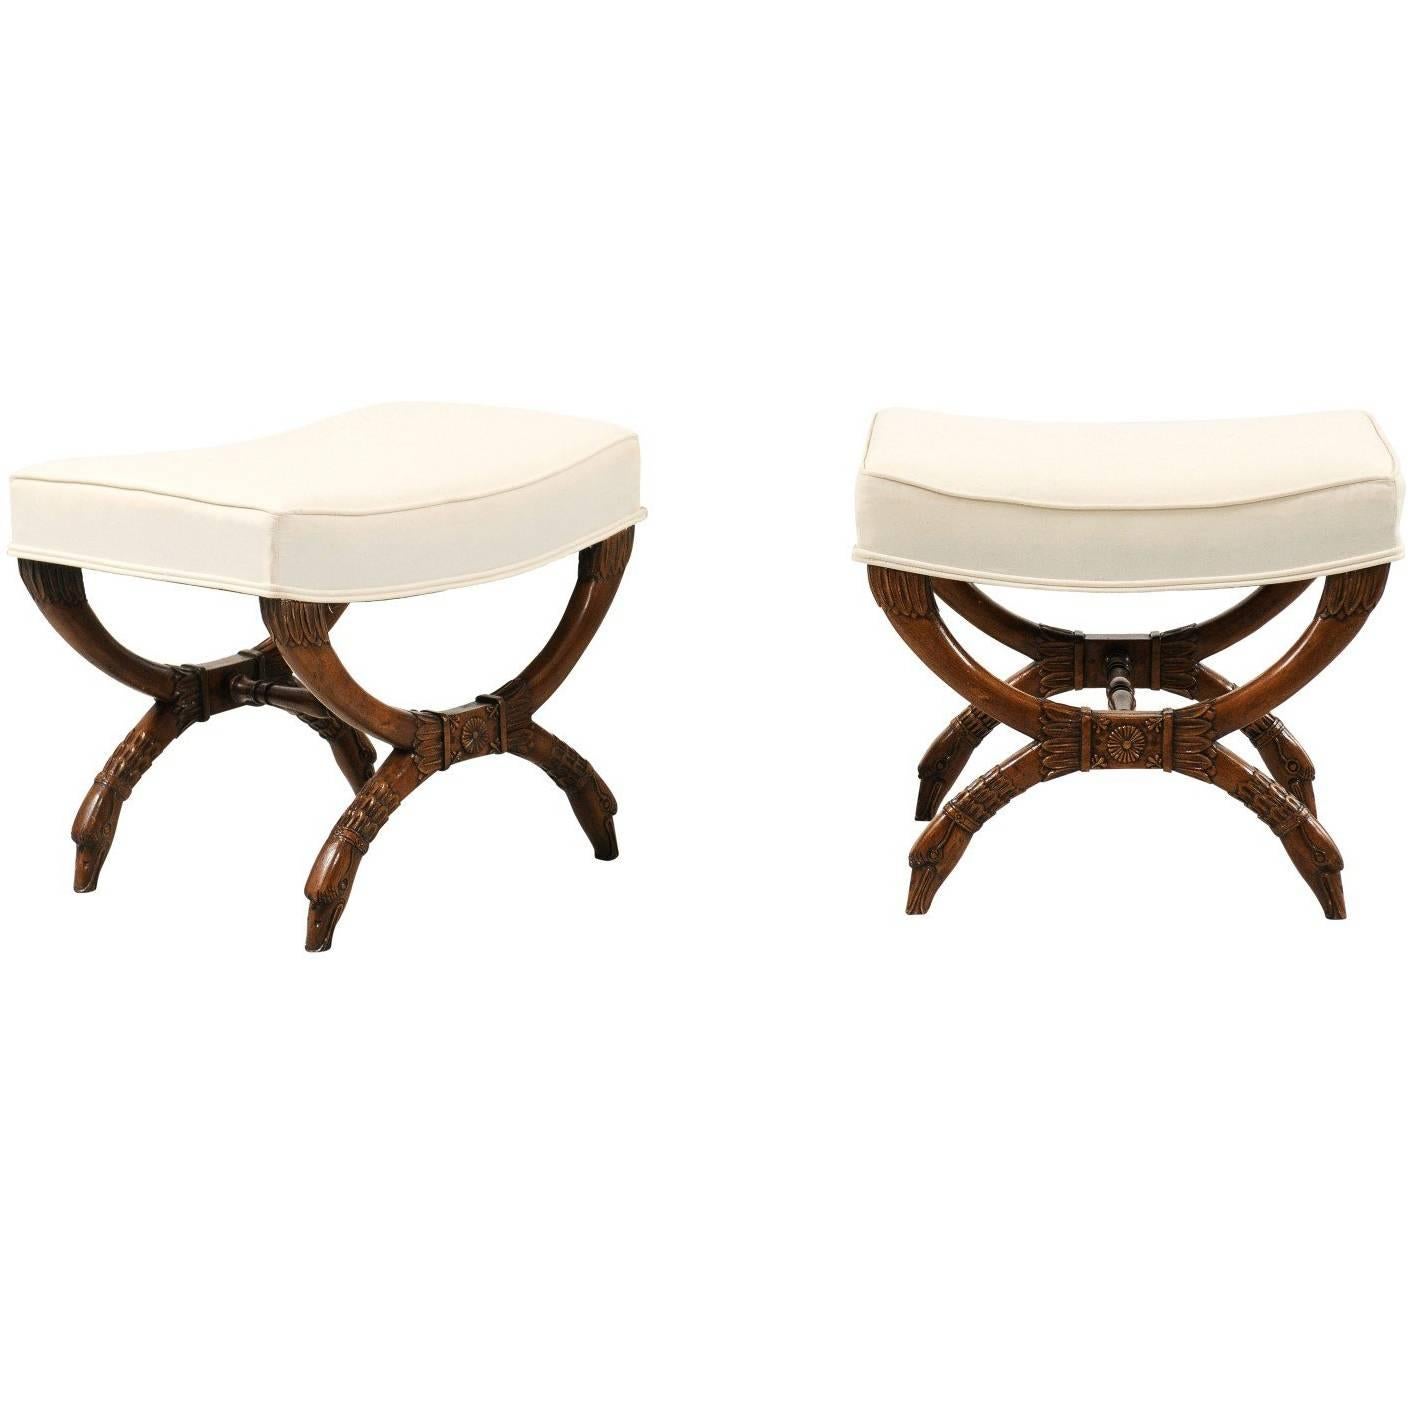 Pair of French Empire Style Walnut X-Form Stools with Cornucopia and Swan Motifs